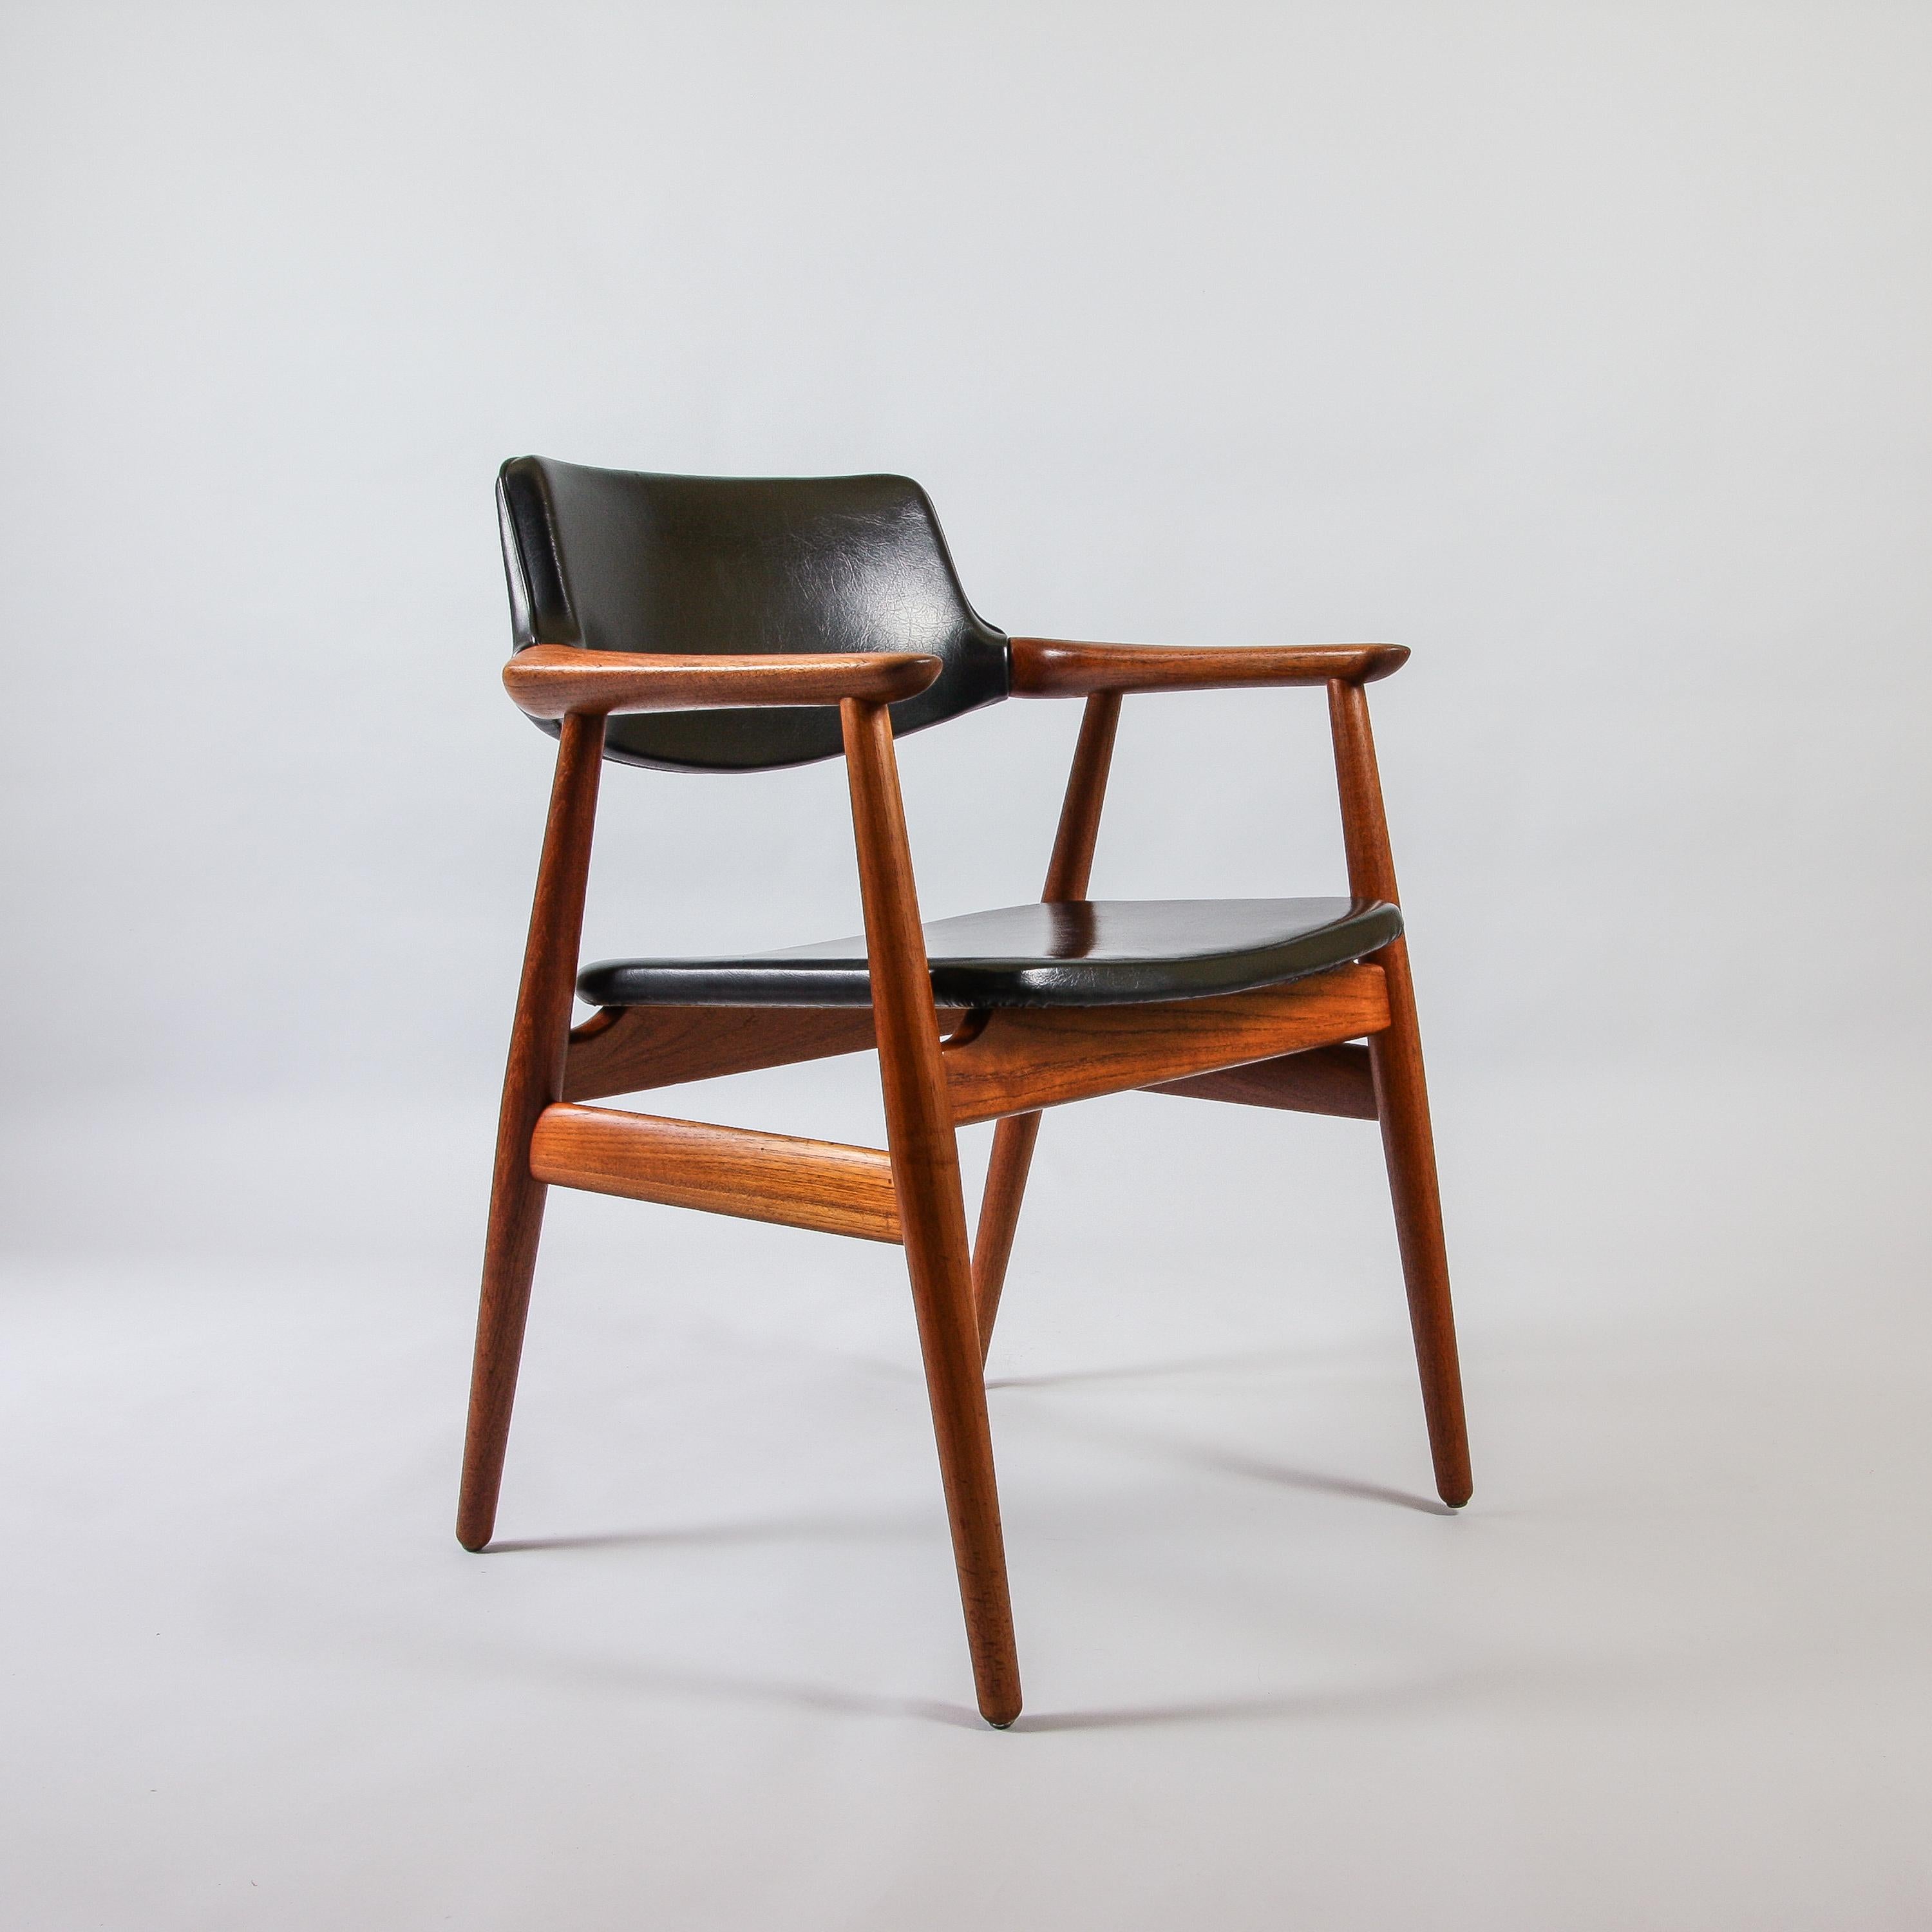 Svend Åge Eriksen GM11 teak and Skai armchair for Glostrup Mobelfabrik, Denmark, 1960s. The teak frame has been re-oiled whilst retaining much of its patina and the Skai is in excellent condition. Two available. Perfect for the desk or dining table.